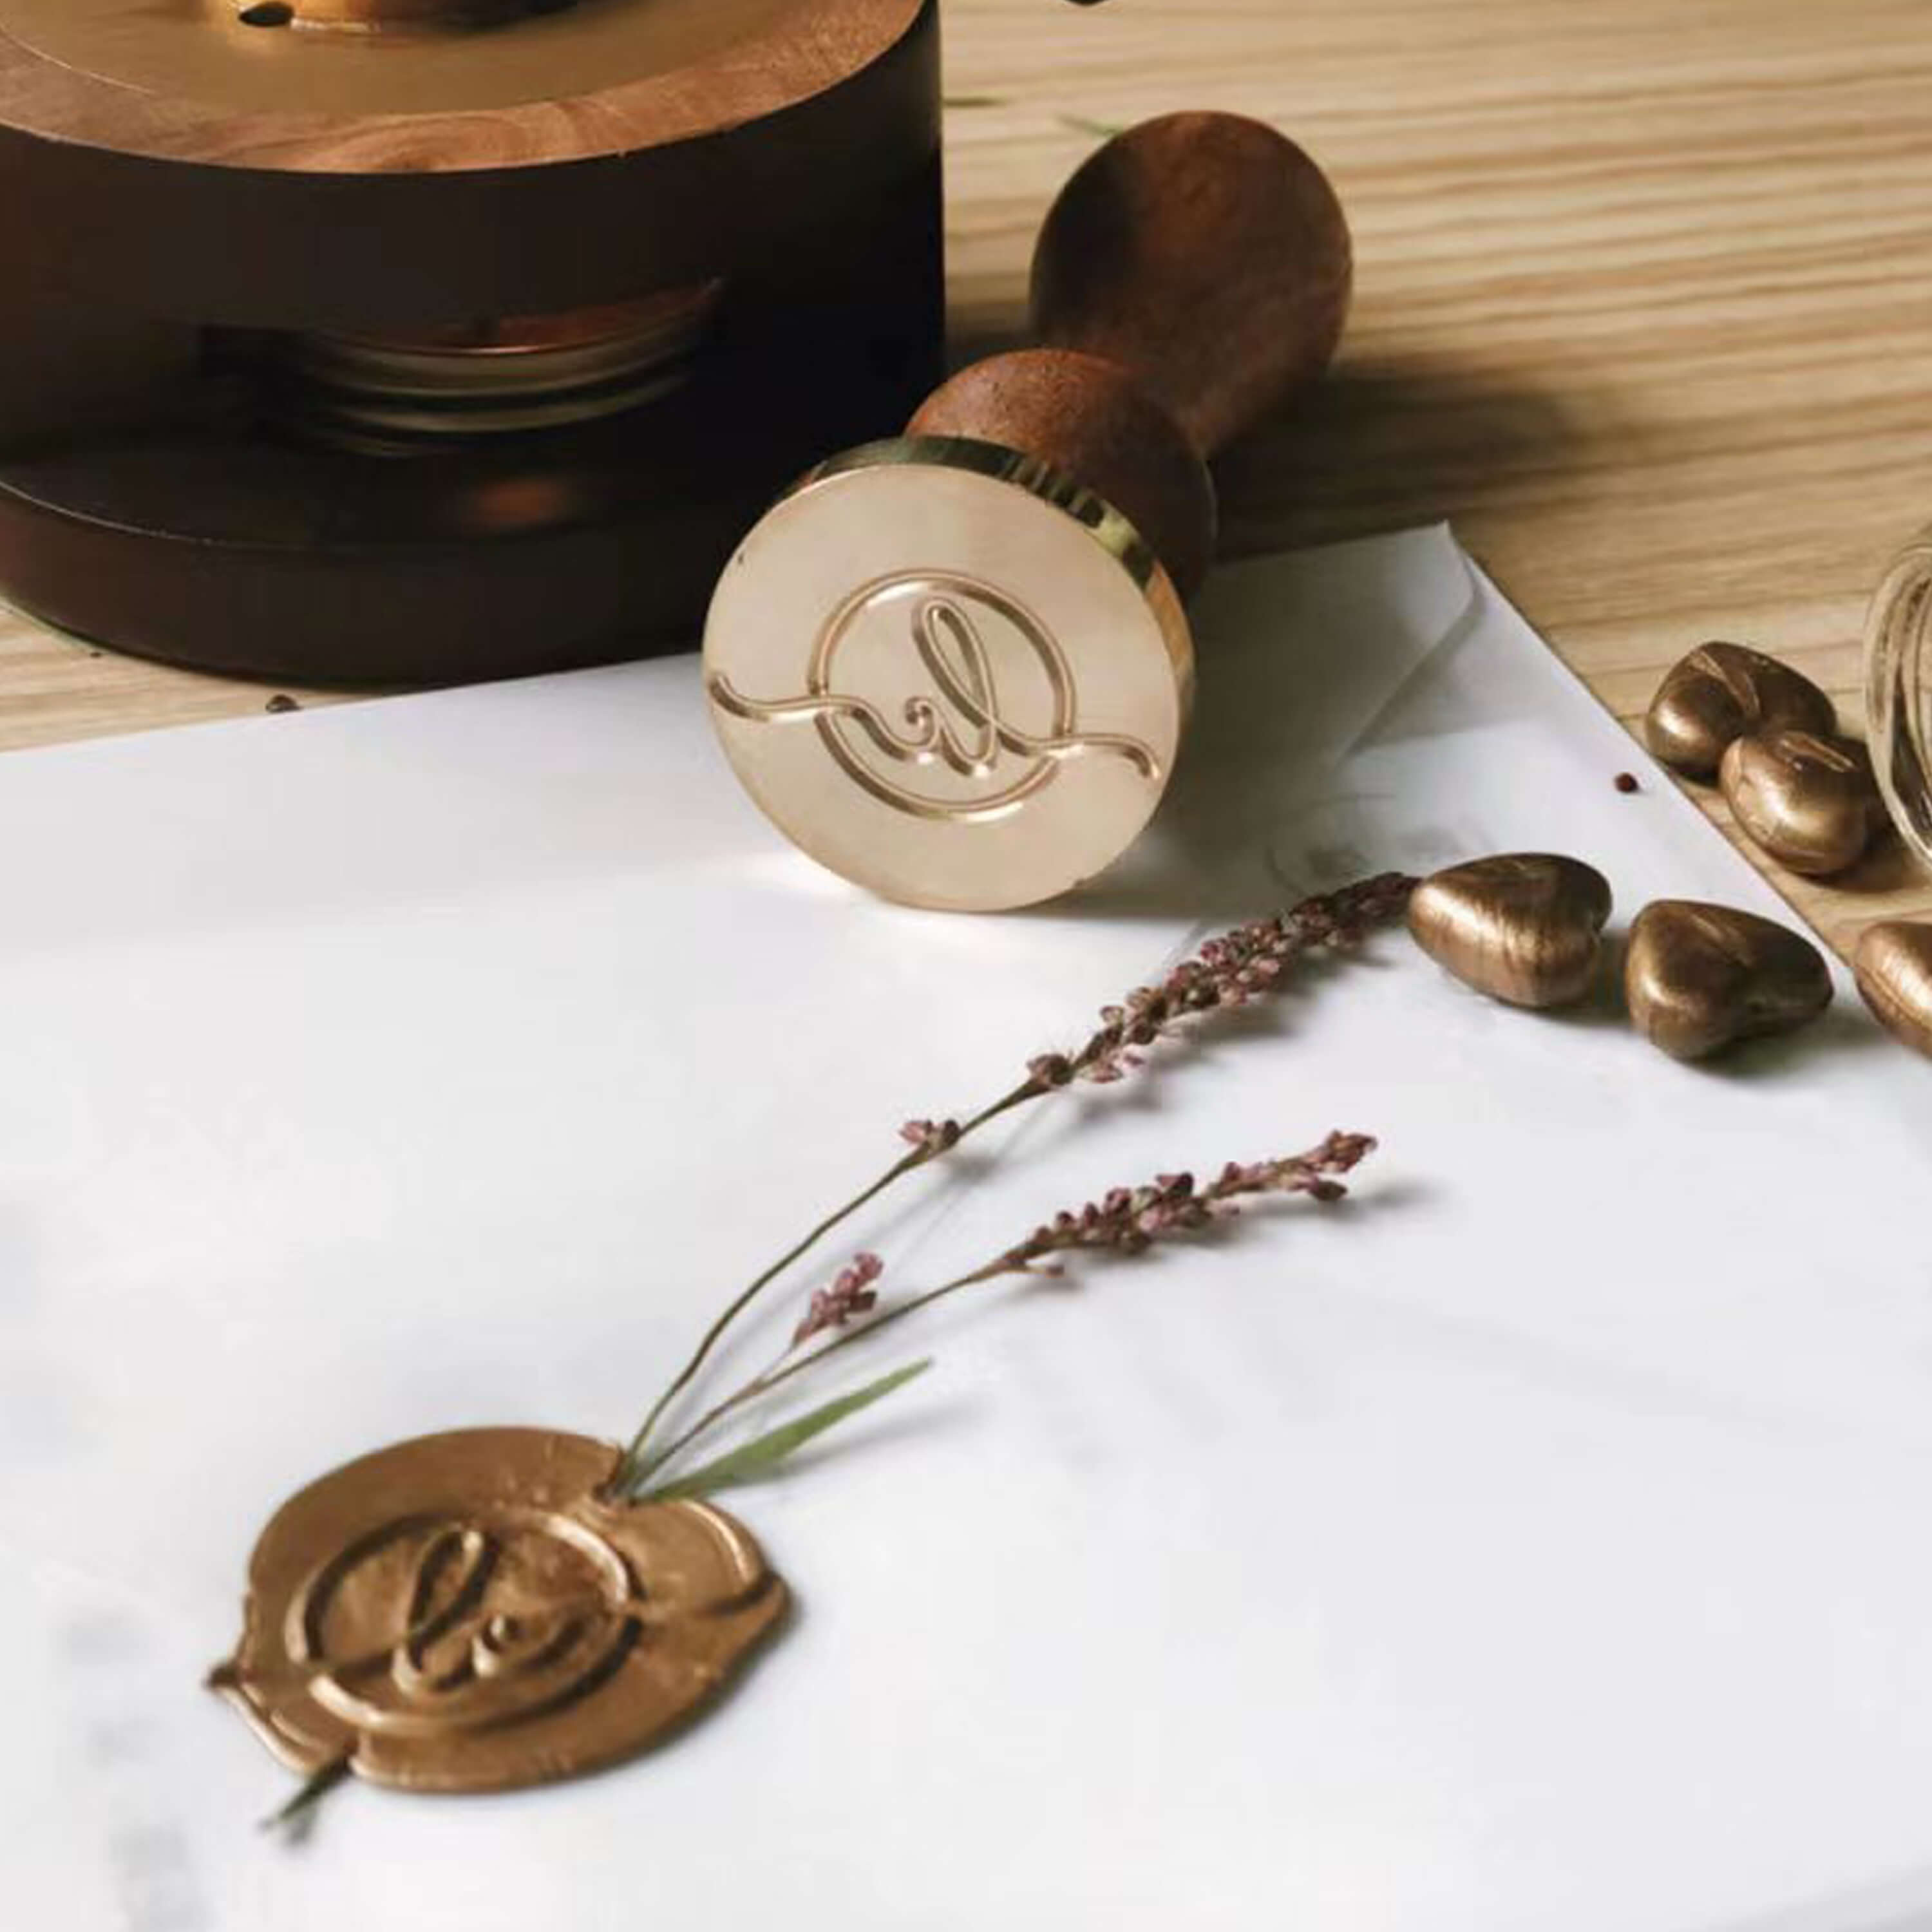 Fully Customized Wax Seal Stamp with Your Own Artwork